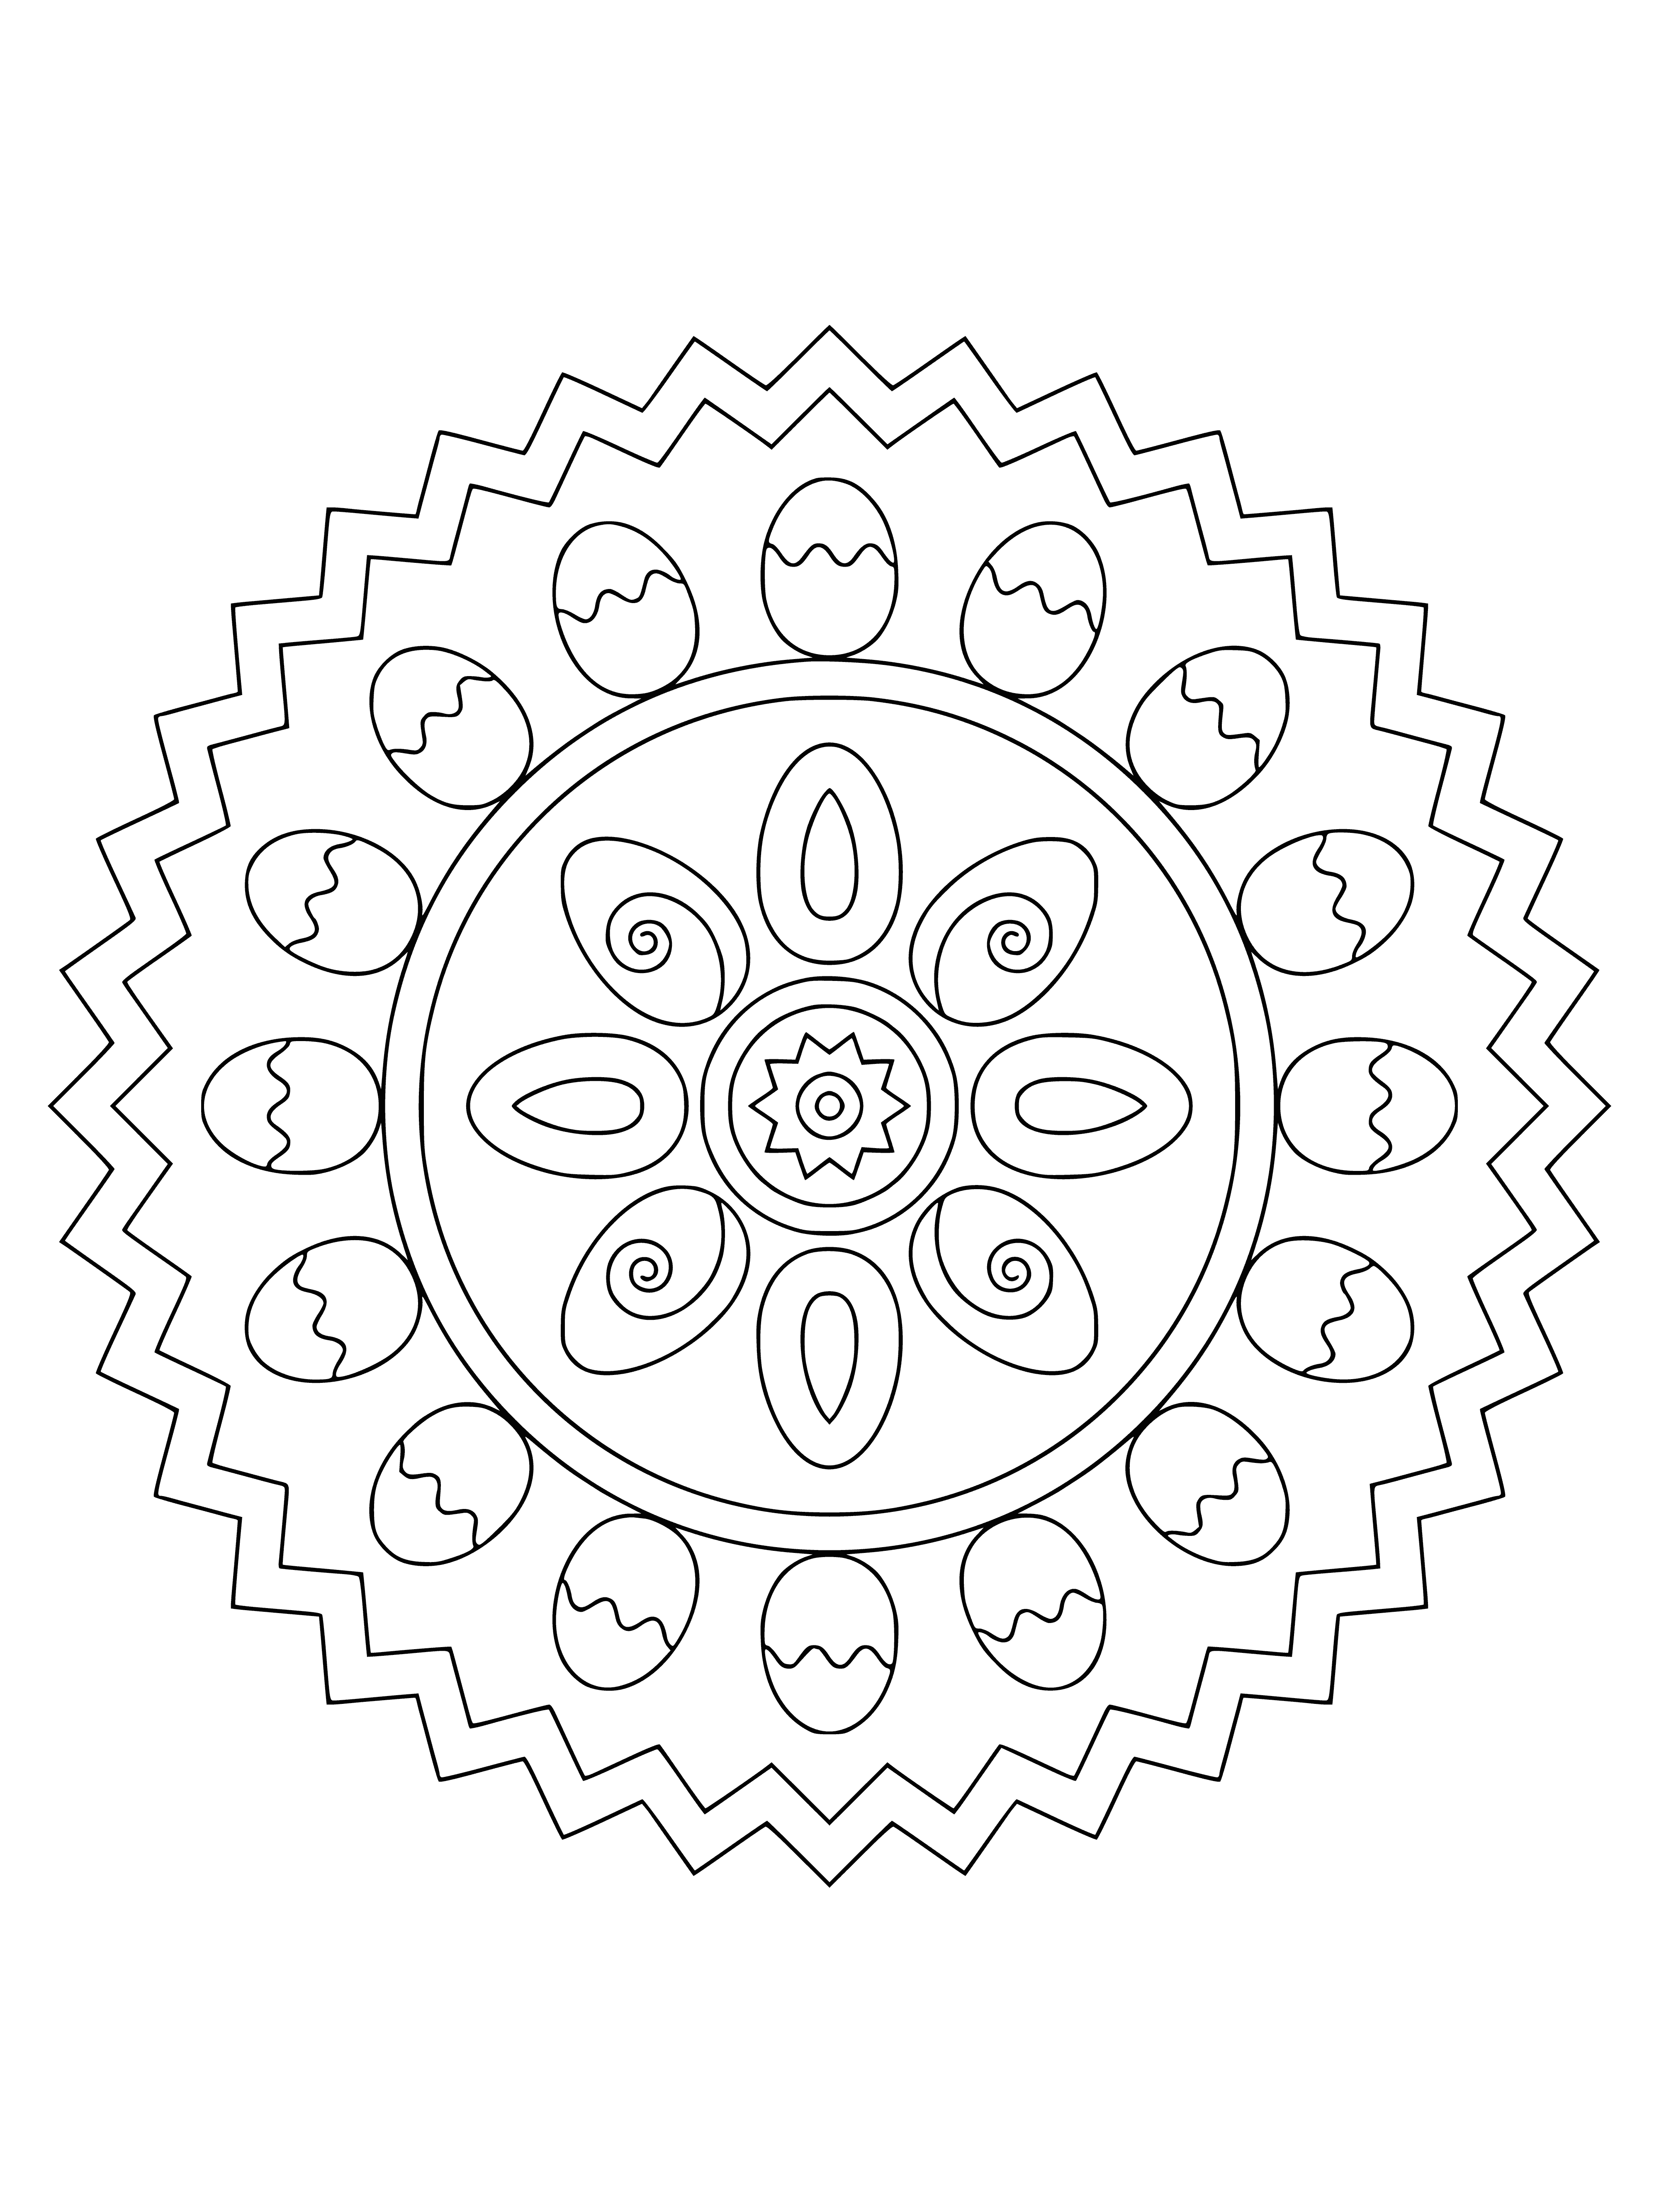 coloring page: A mandala with flowers, bunnies, butterflies & a yellow chick in center; colors: yellow, green & blue.